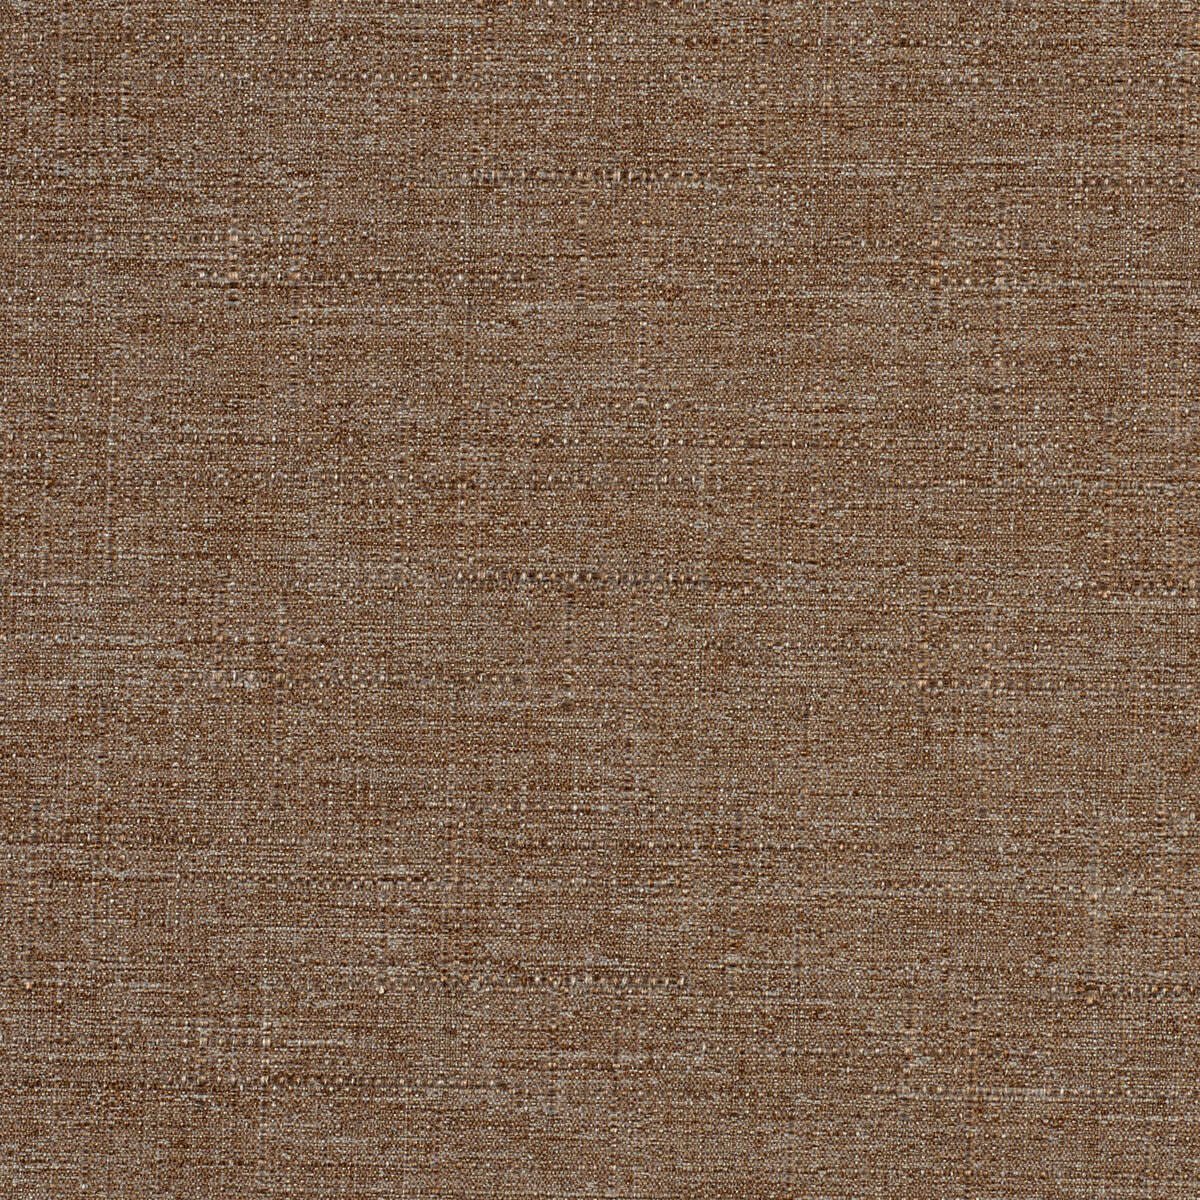 Kravet Contract fabric in 4321-6 color - pattern 4321.6.0 - by Kravet Contract